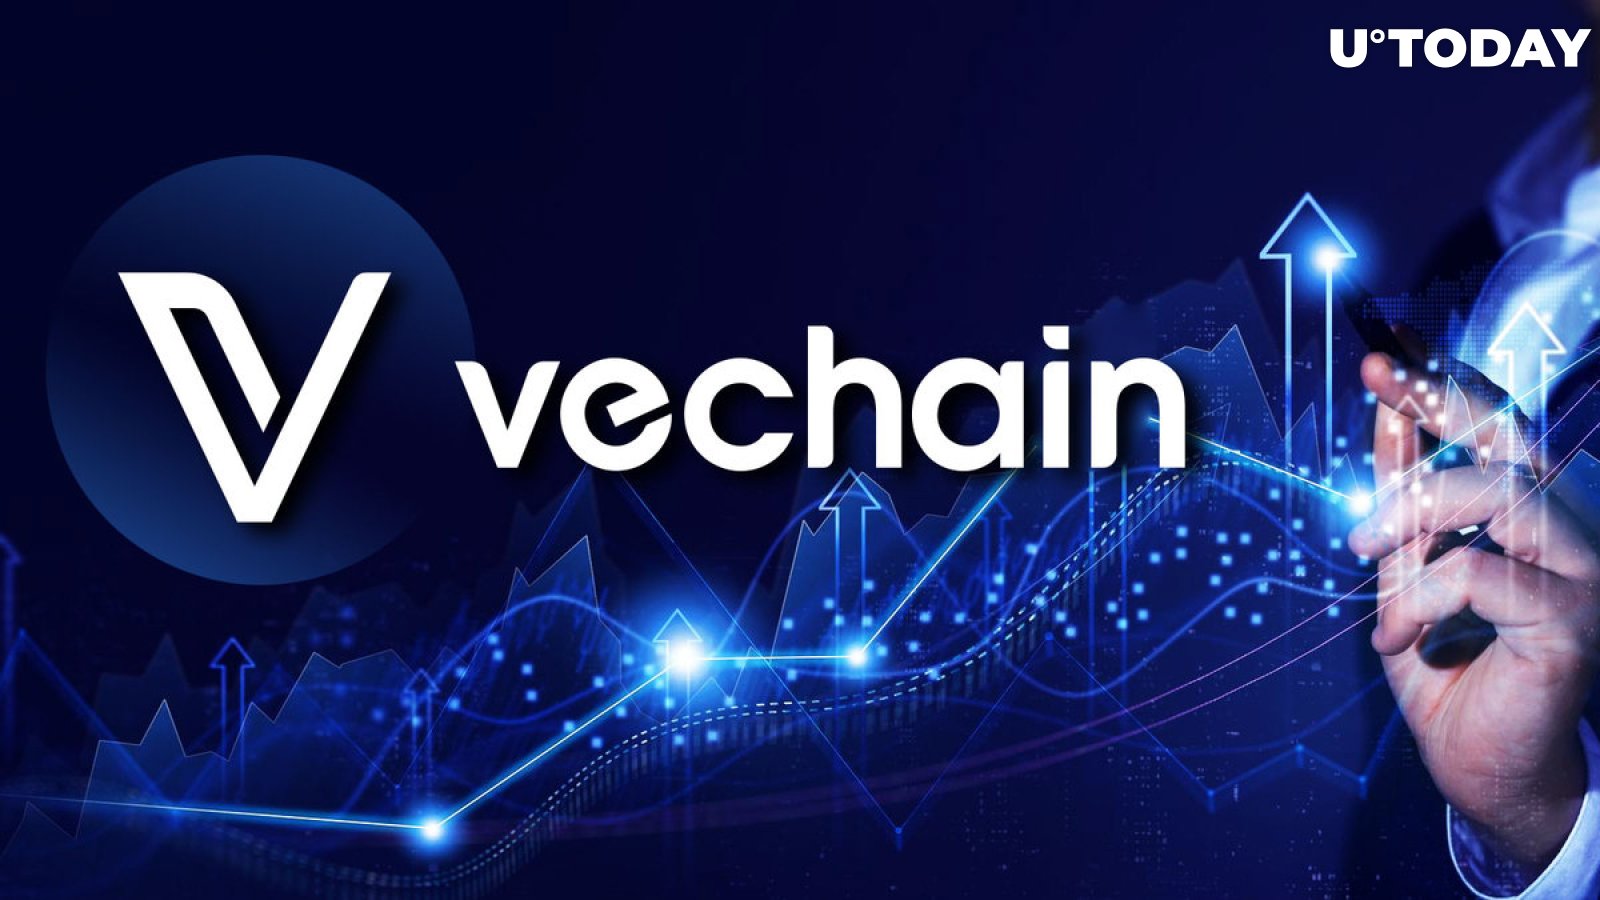 VeChain (VET) Skyrocketed 31% in Day; What's Behind It?